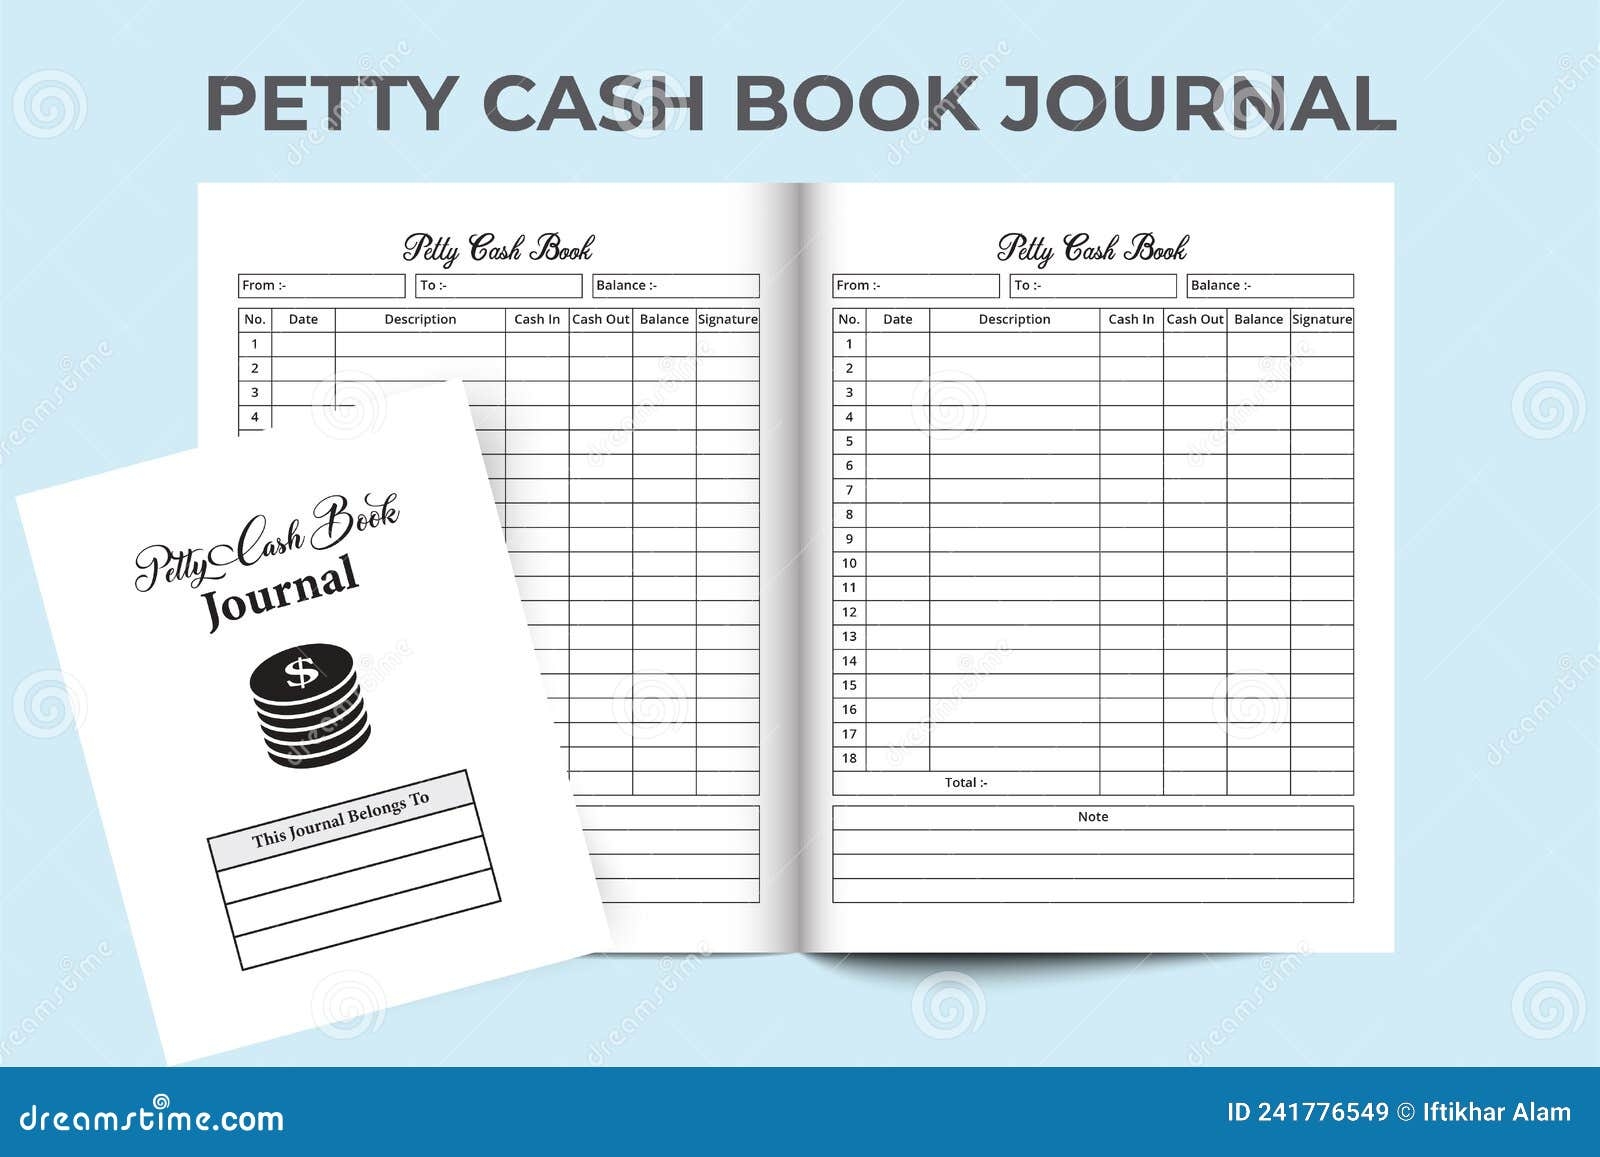 Petty Cash Book Journal KDP Interior Business Cashes In And Out Tracker Notebook Template Stock Vector Illustration Of Notebook Paper 241776549 - Free Cash Book Template Printable